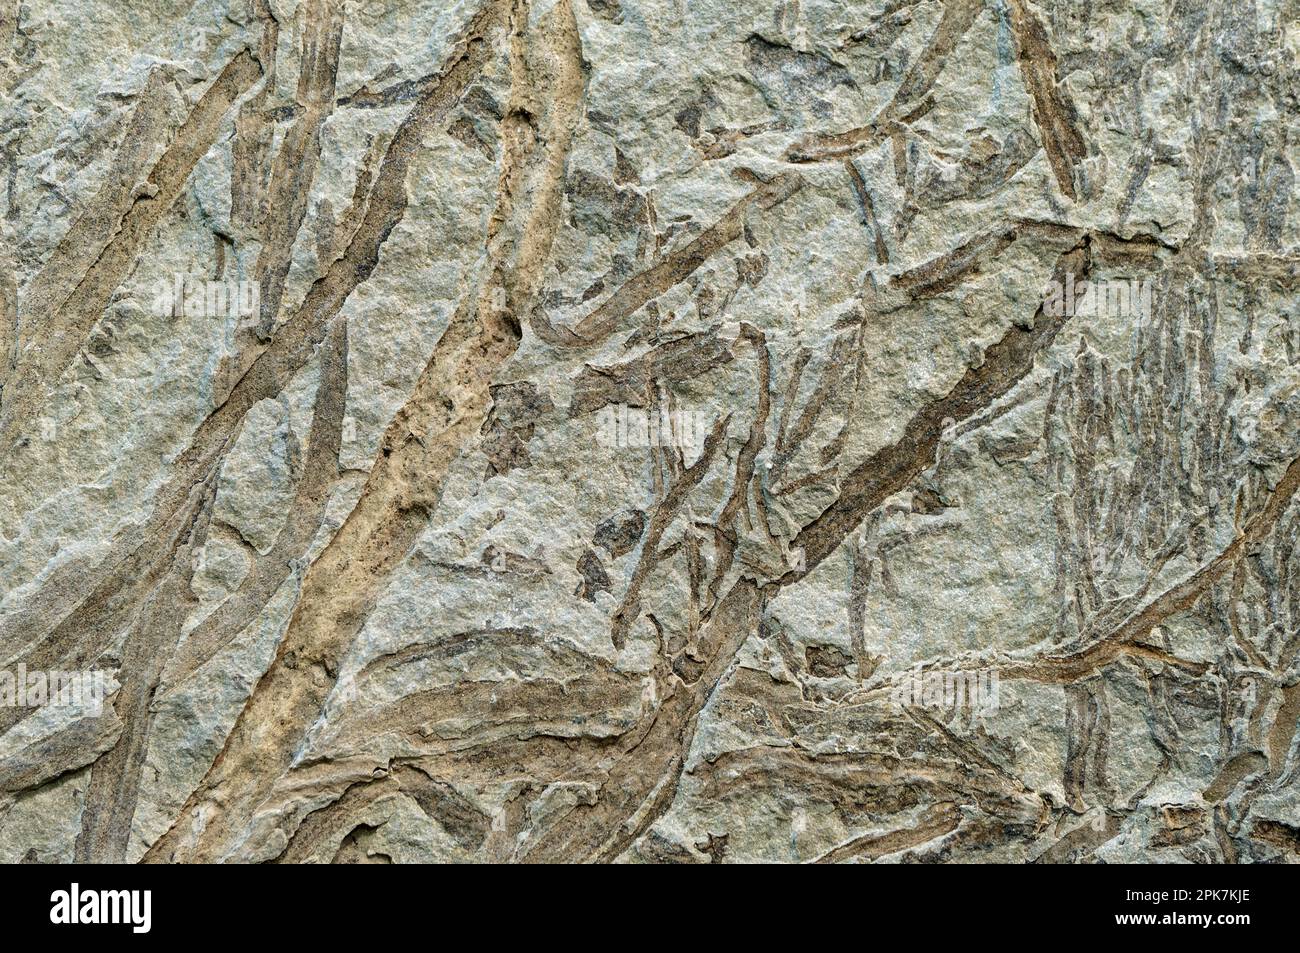 Fossilized plant, imprint on stone, abstract natural background Stock Photo